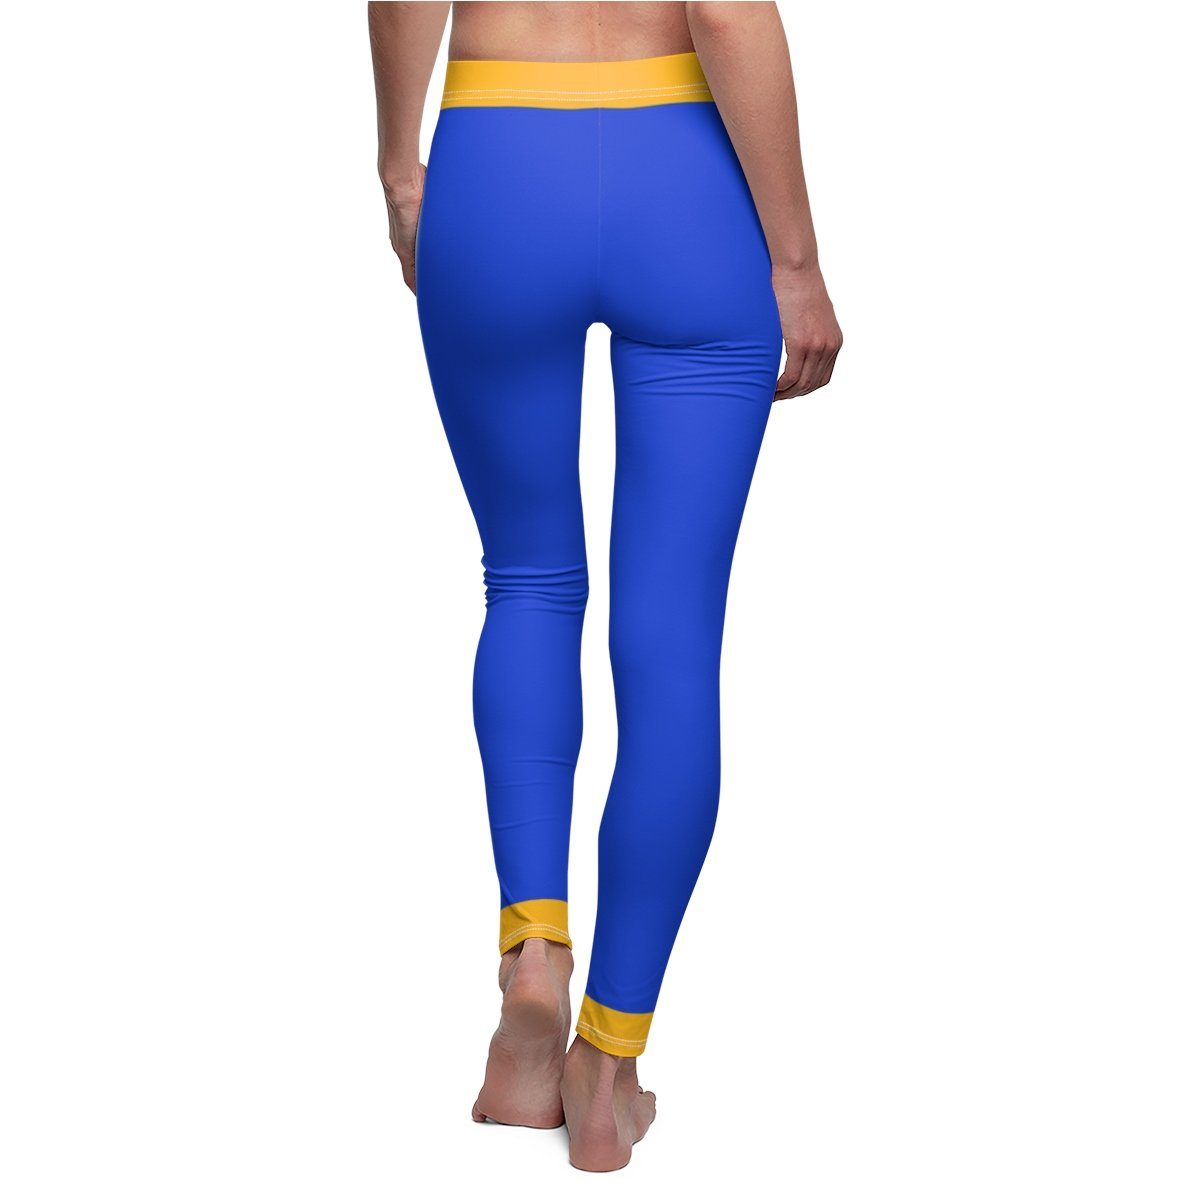 Electric - V.2 - Extreme Sportswear Cut & Sew Leggings Template-Photoshop Template - Photo Solutions